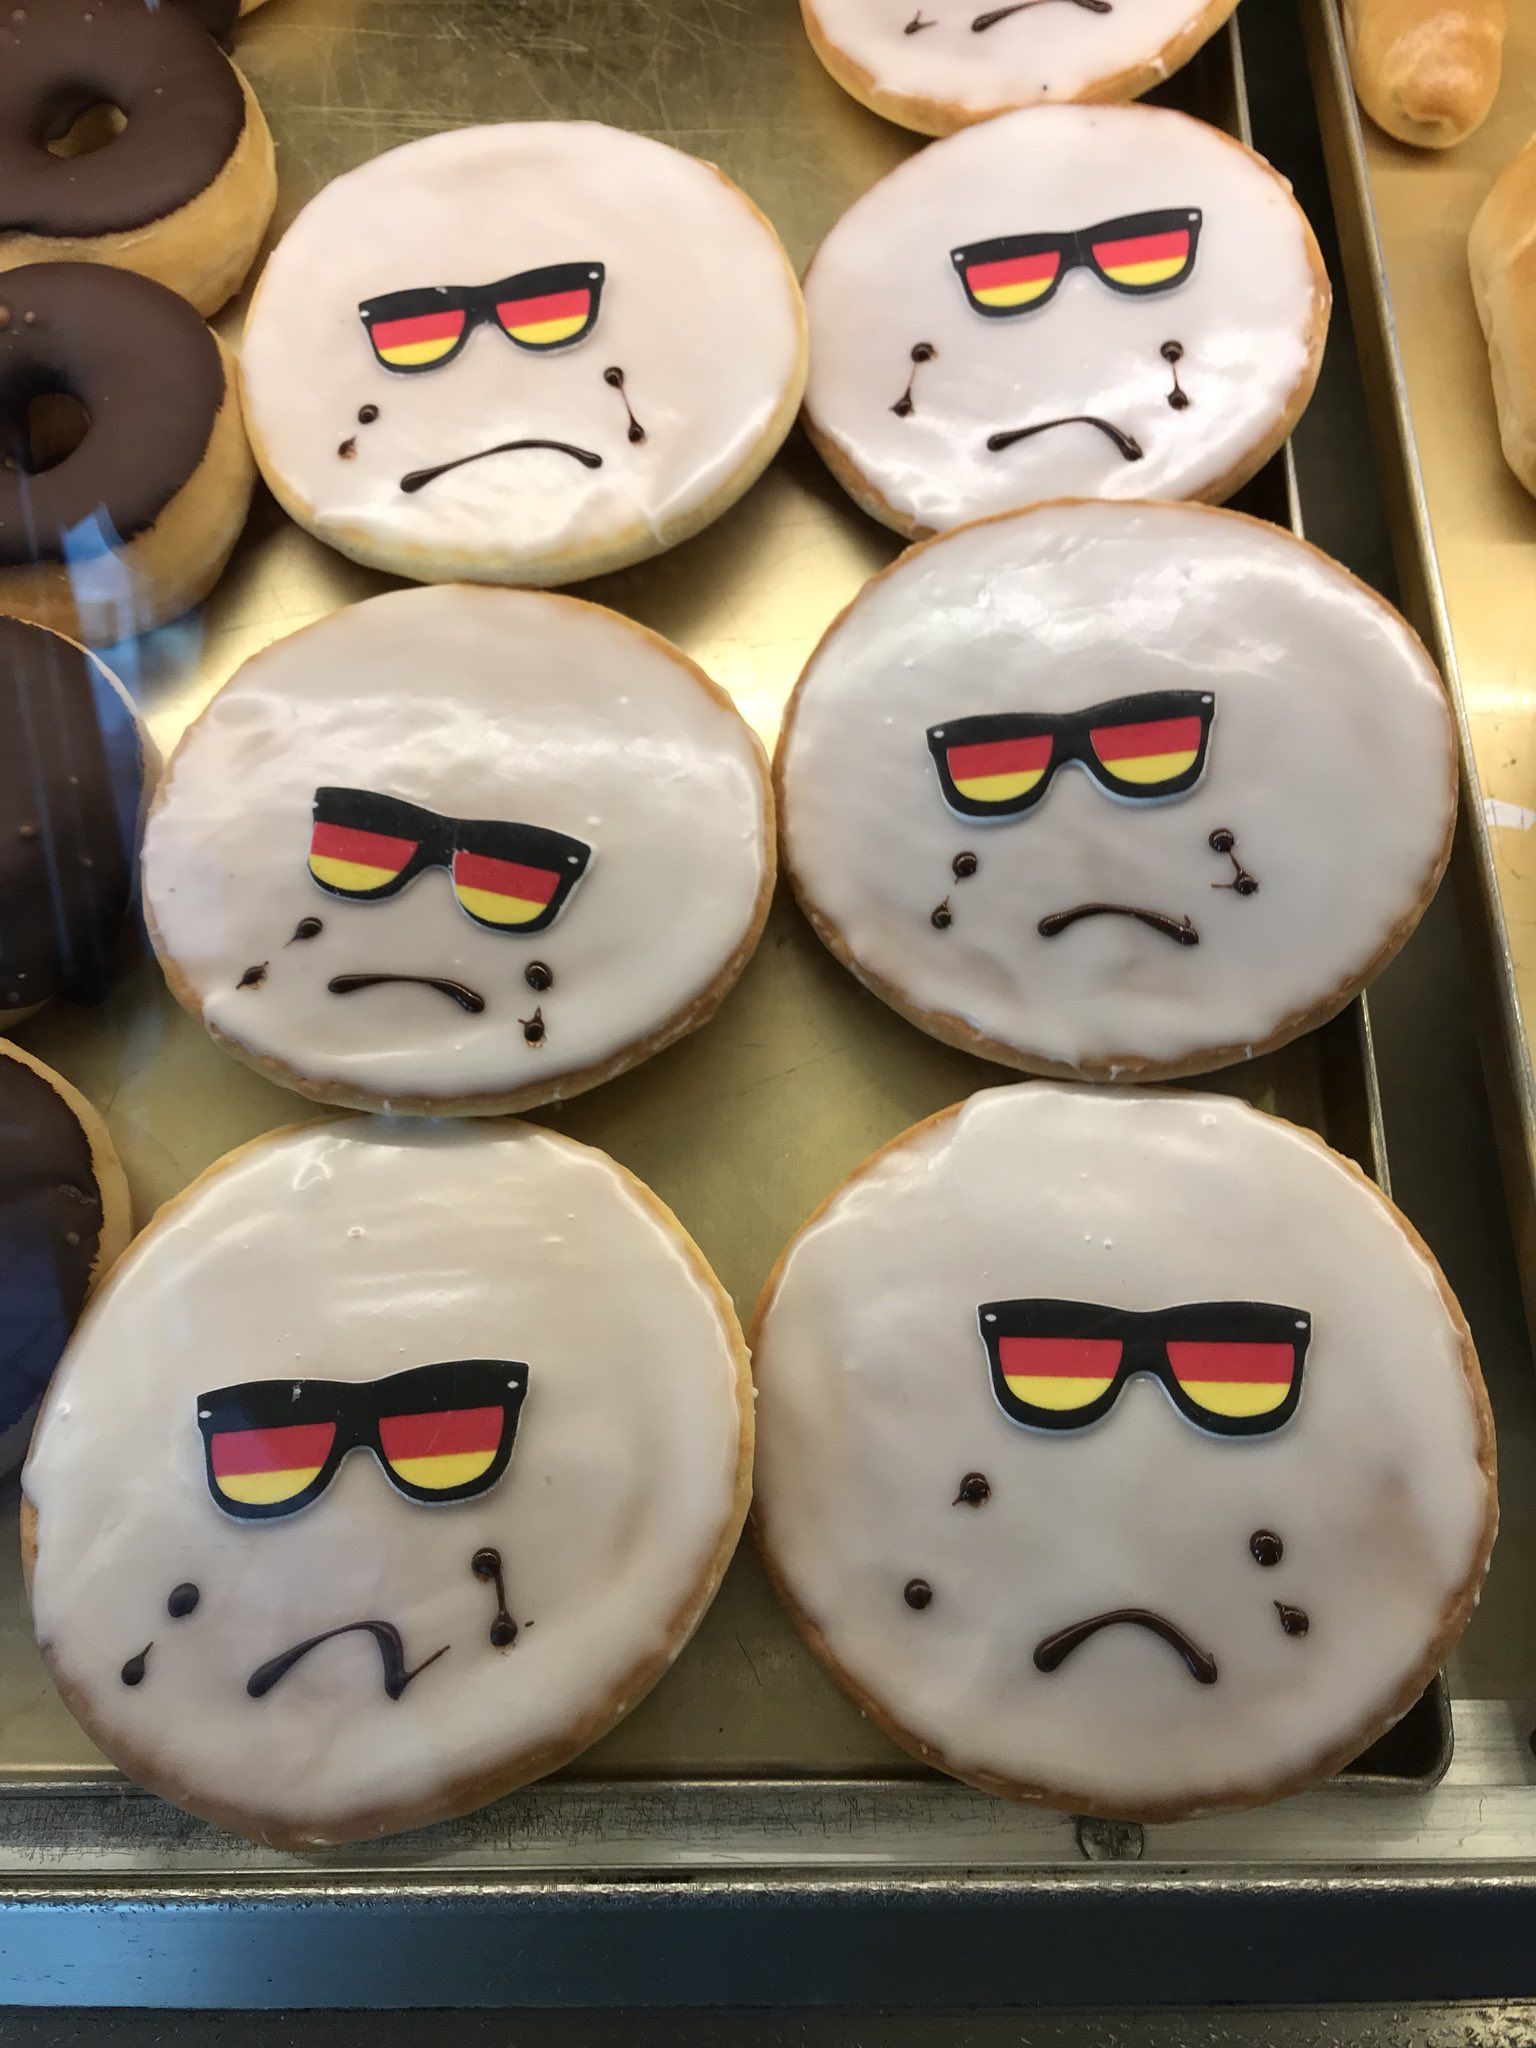 My local bakery in Germany...